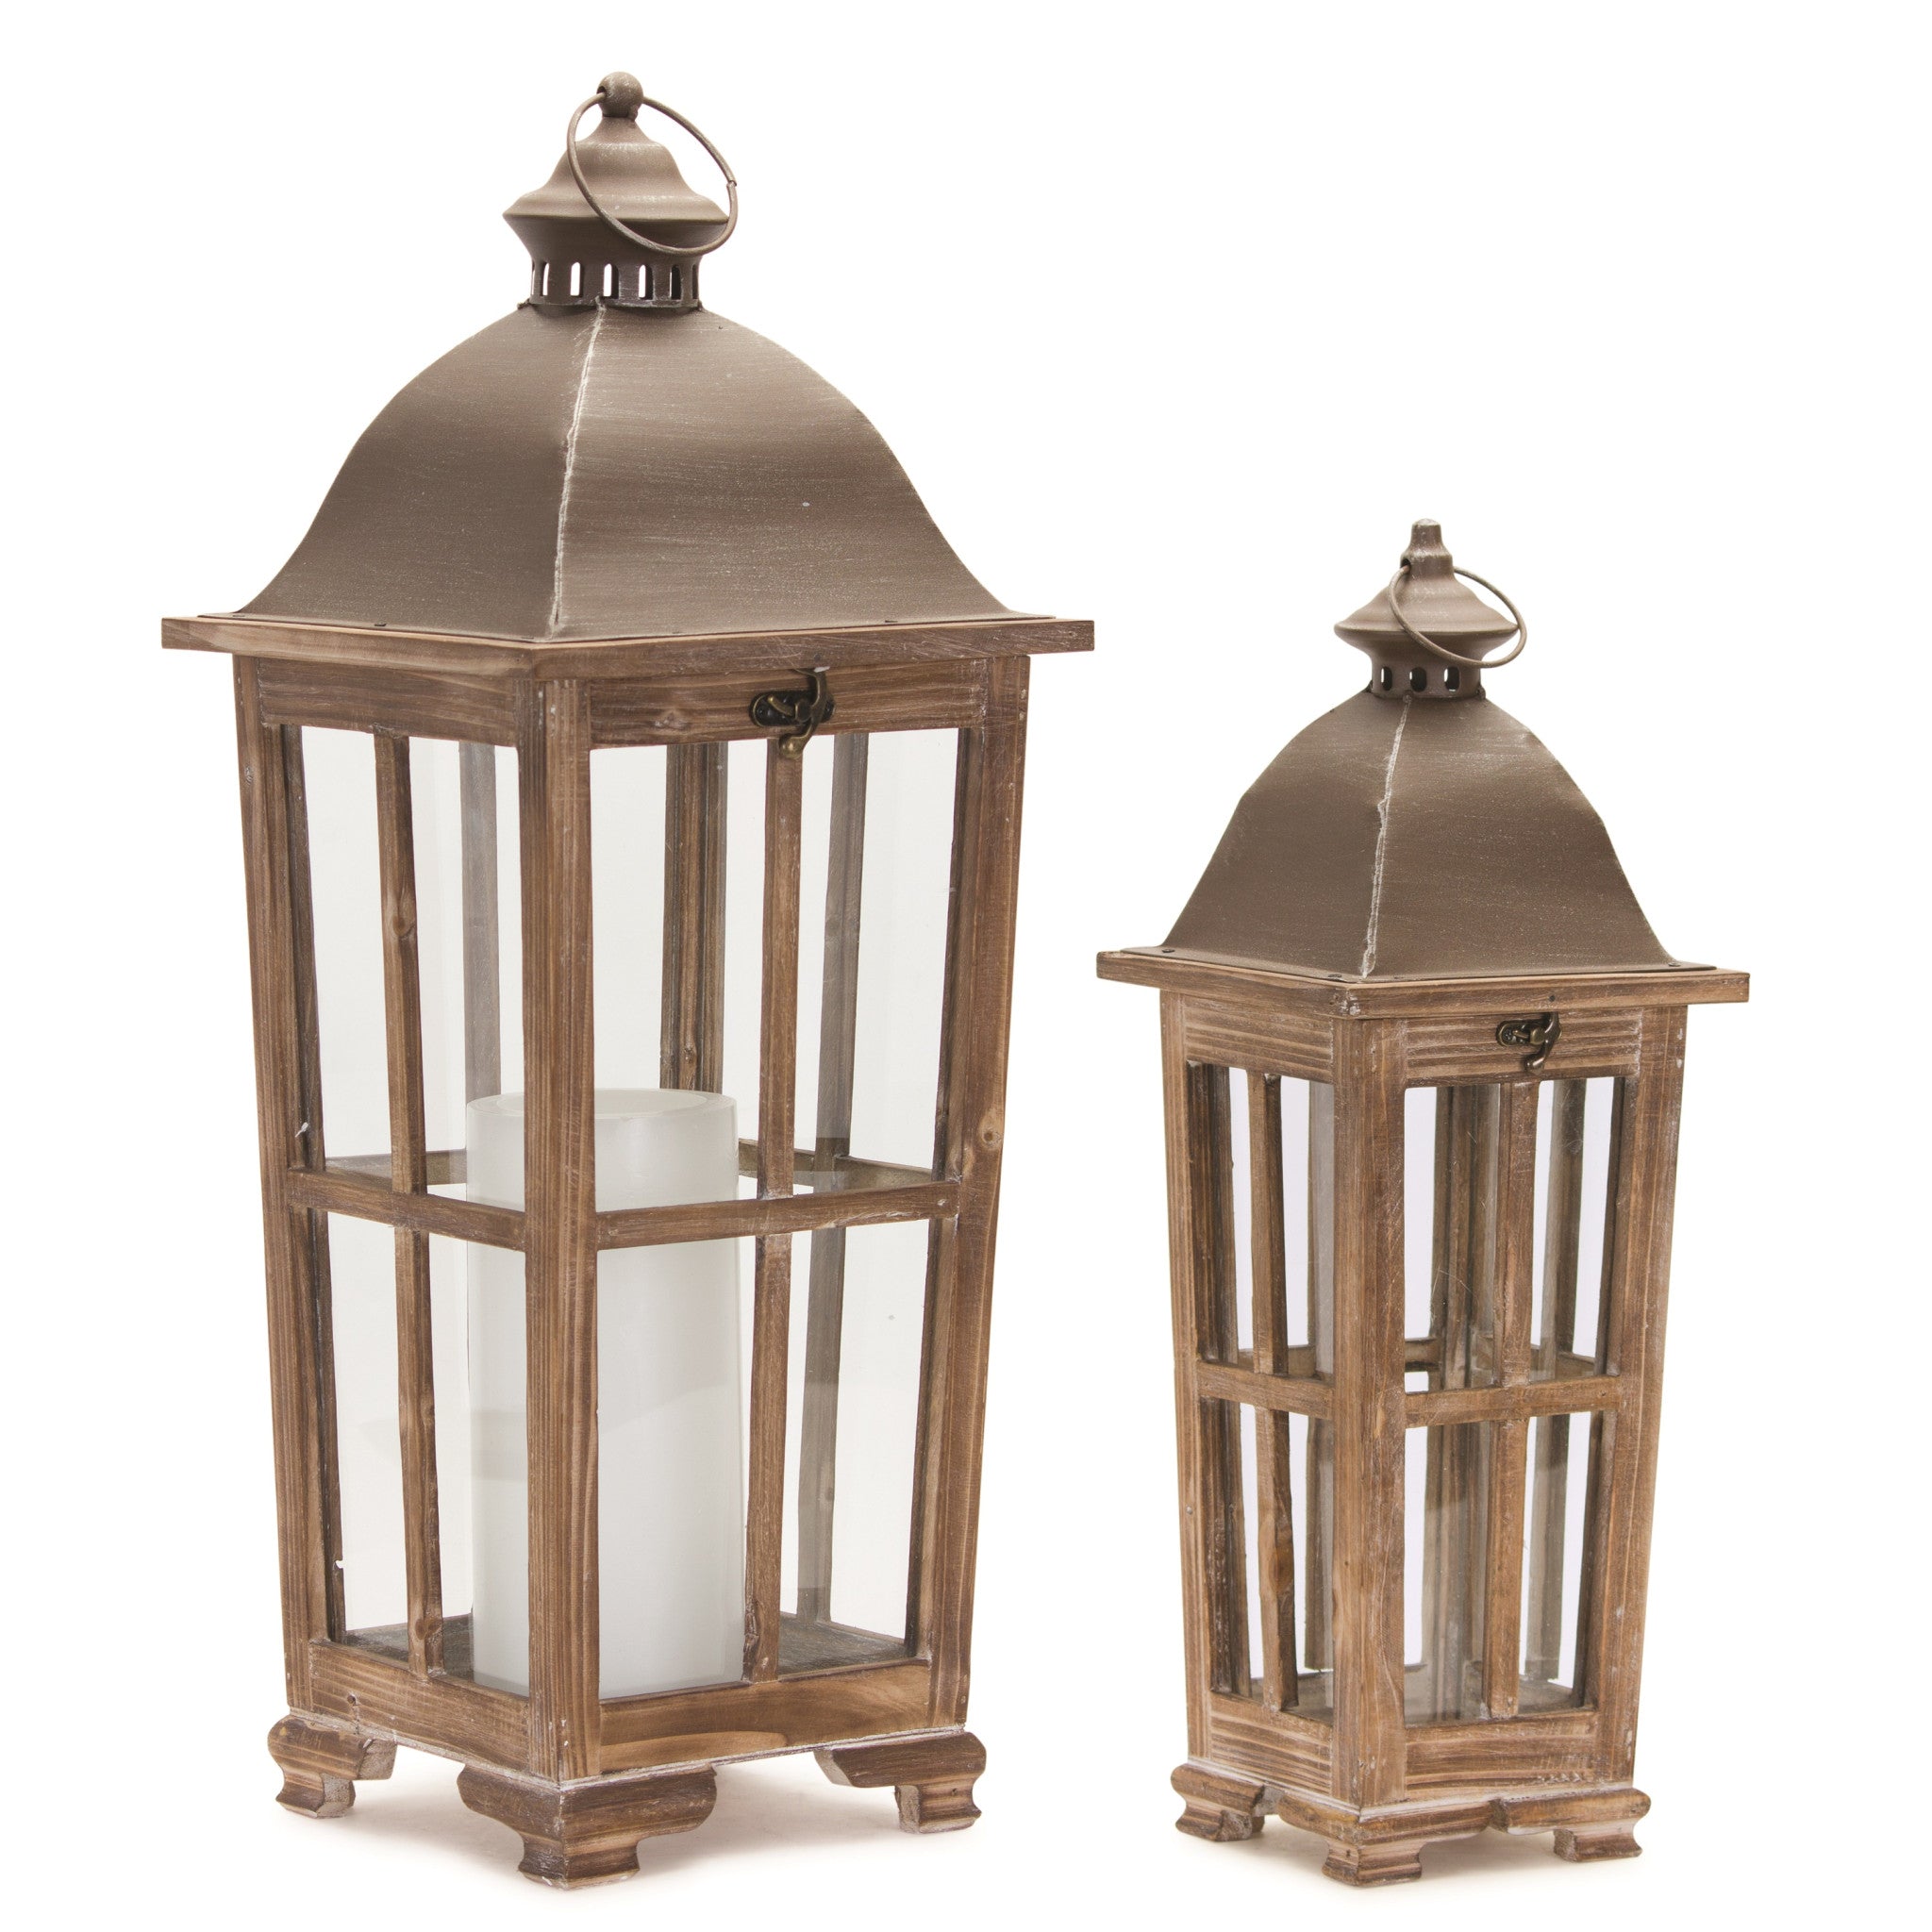 Set of Two Natural Solid Wood Ornate Tabletop Lantern Candle Holders